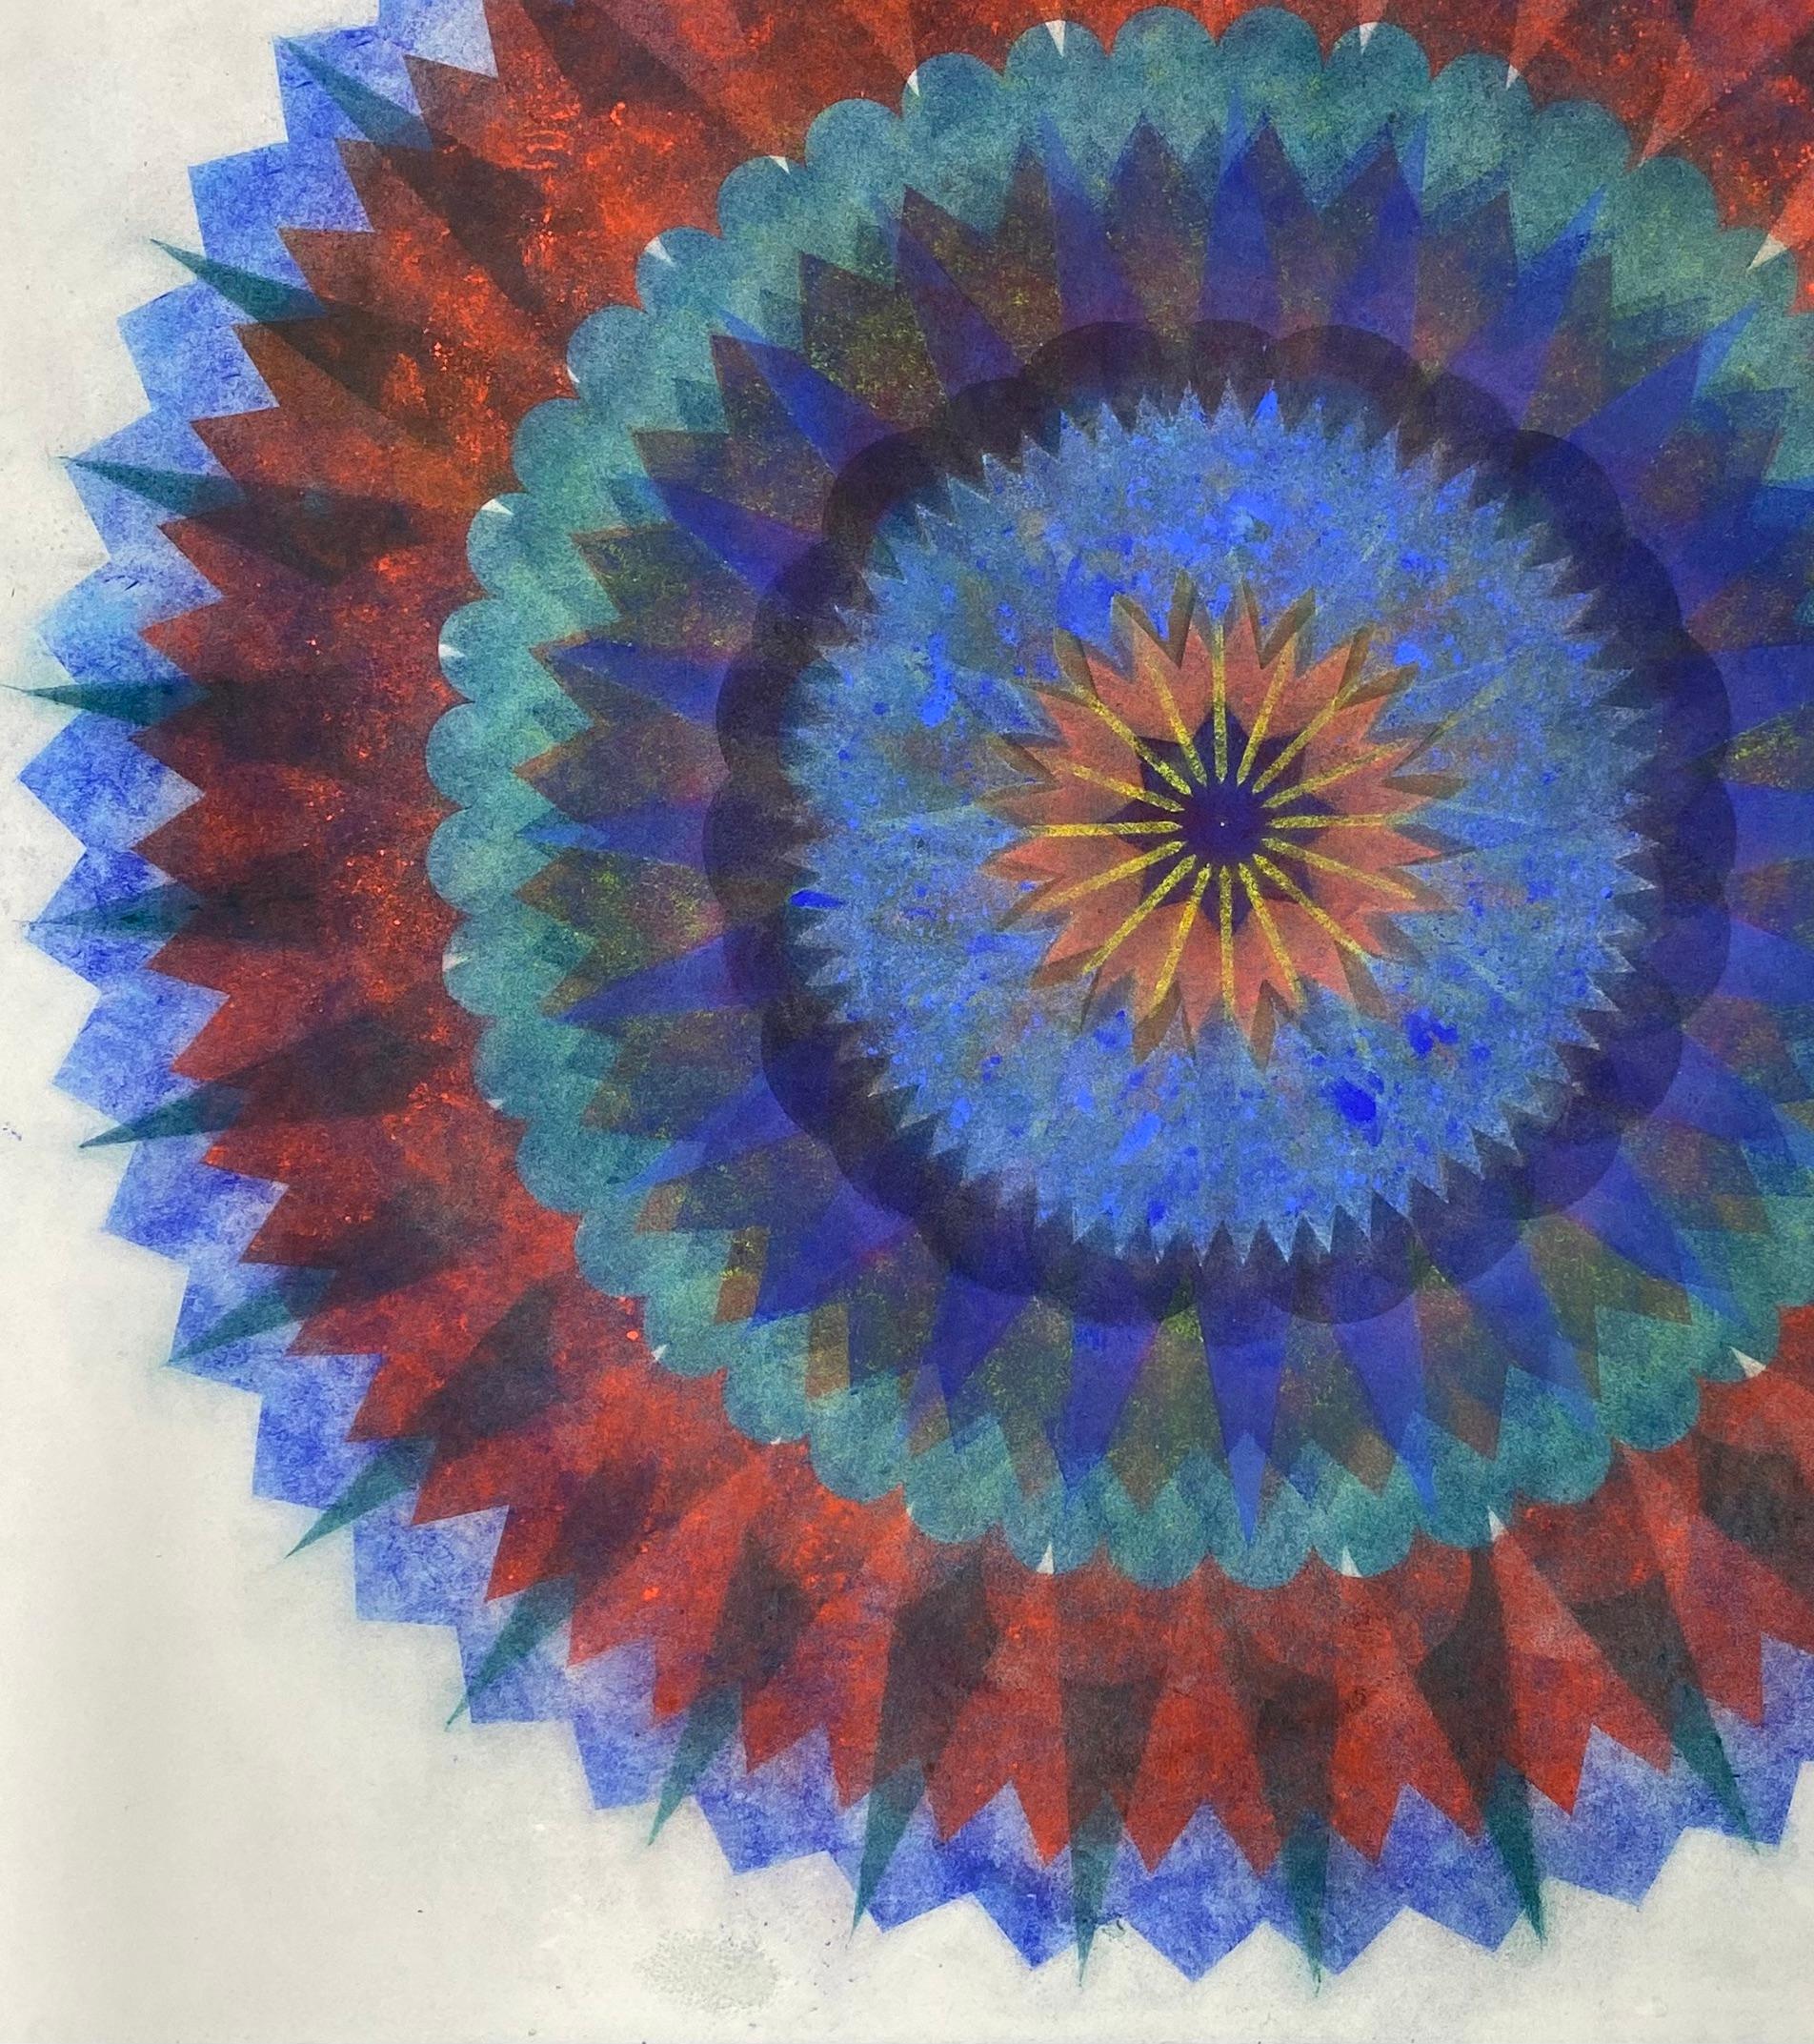 Primavera Pop 28C, Red, Cobalt Blue, Teal, Yellow Geometric Abstract Mandala - Contemporary Art by Mary Judge